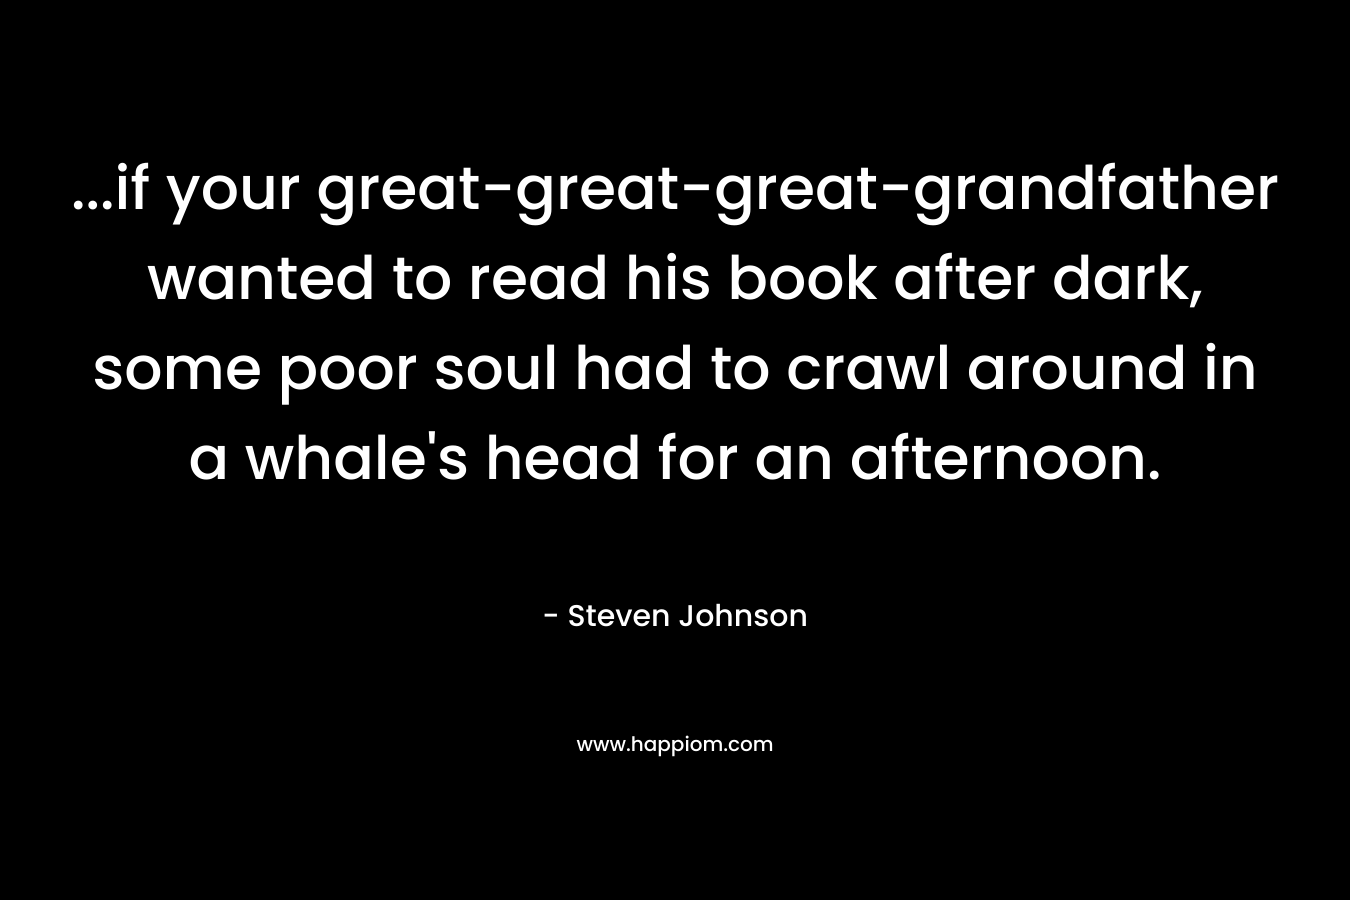 …if your great-great-great-grandfather wanted to read his book after dark, some poor soul had to crawl around in a whale’s head for an afternoon. – Steven Johnson